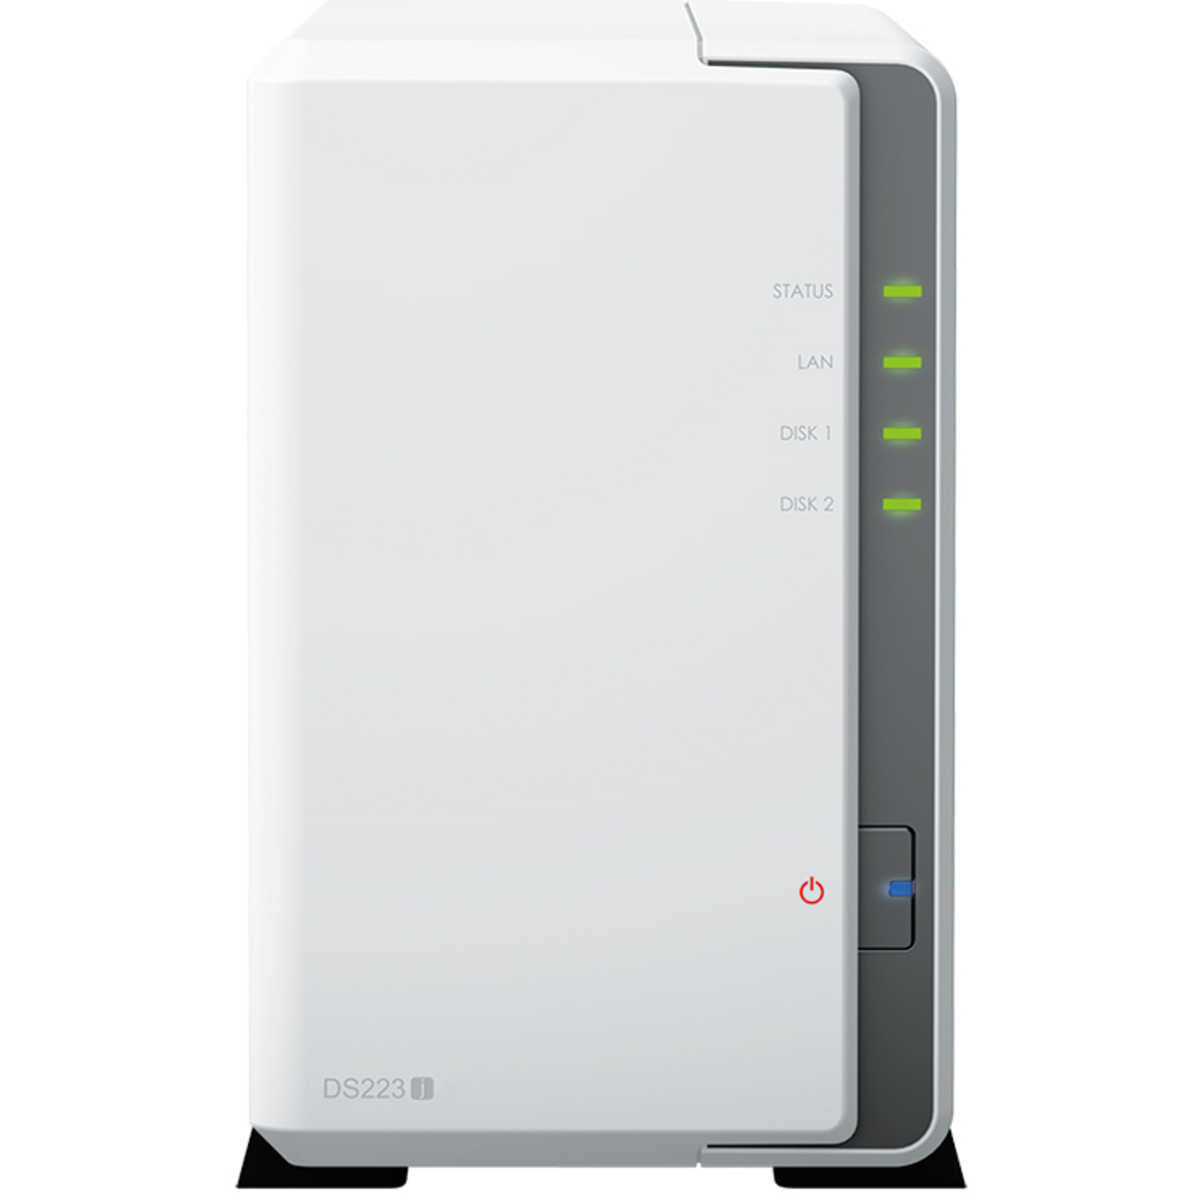 Synology DiskStation DS223j 12tb 2-Bay Desktop Personal / Basic Home / Small Office NAS - Network Attached Storage Device 2x6tb Seagate EXOS 7E10 ST6000NM019B 3.5 7200rpm SATA 6Gb/s HDD ENTERPRISE Class Drives Installed - Burn-In Tested DiskStation DS223j